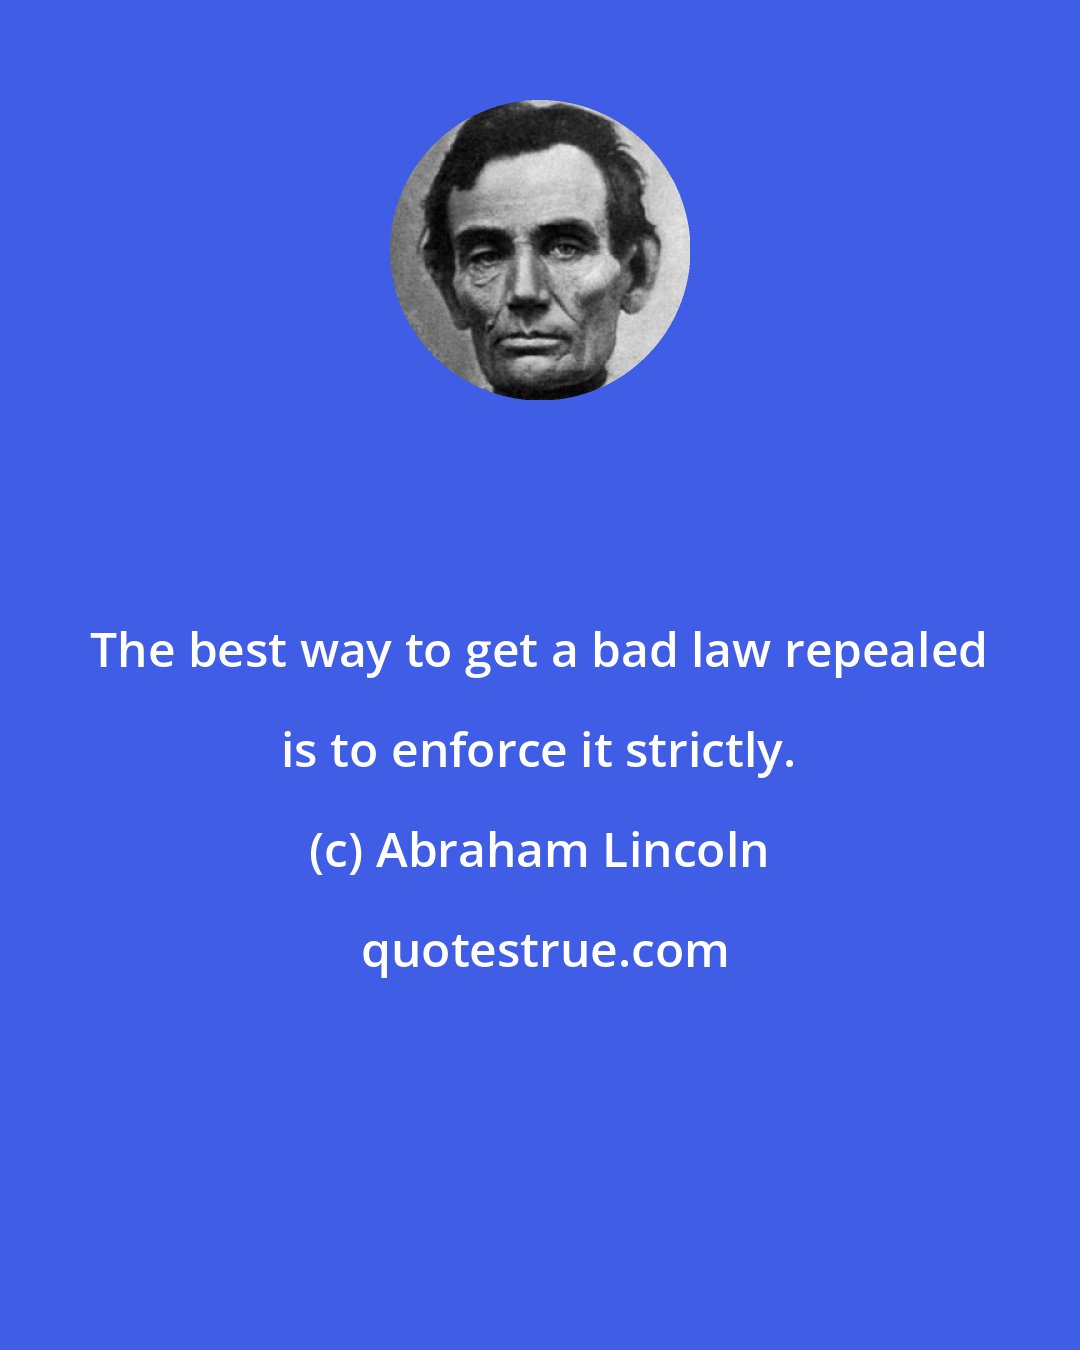 Abraham Lincoln: The best way to get a bad law repealed is to enforce it strictly.